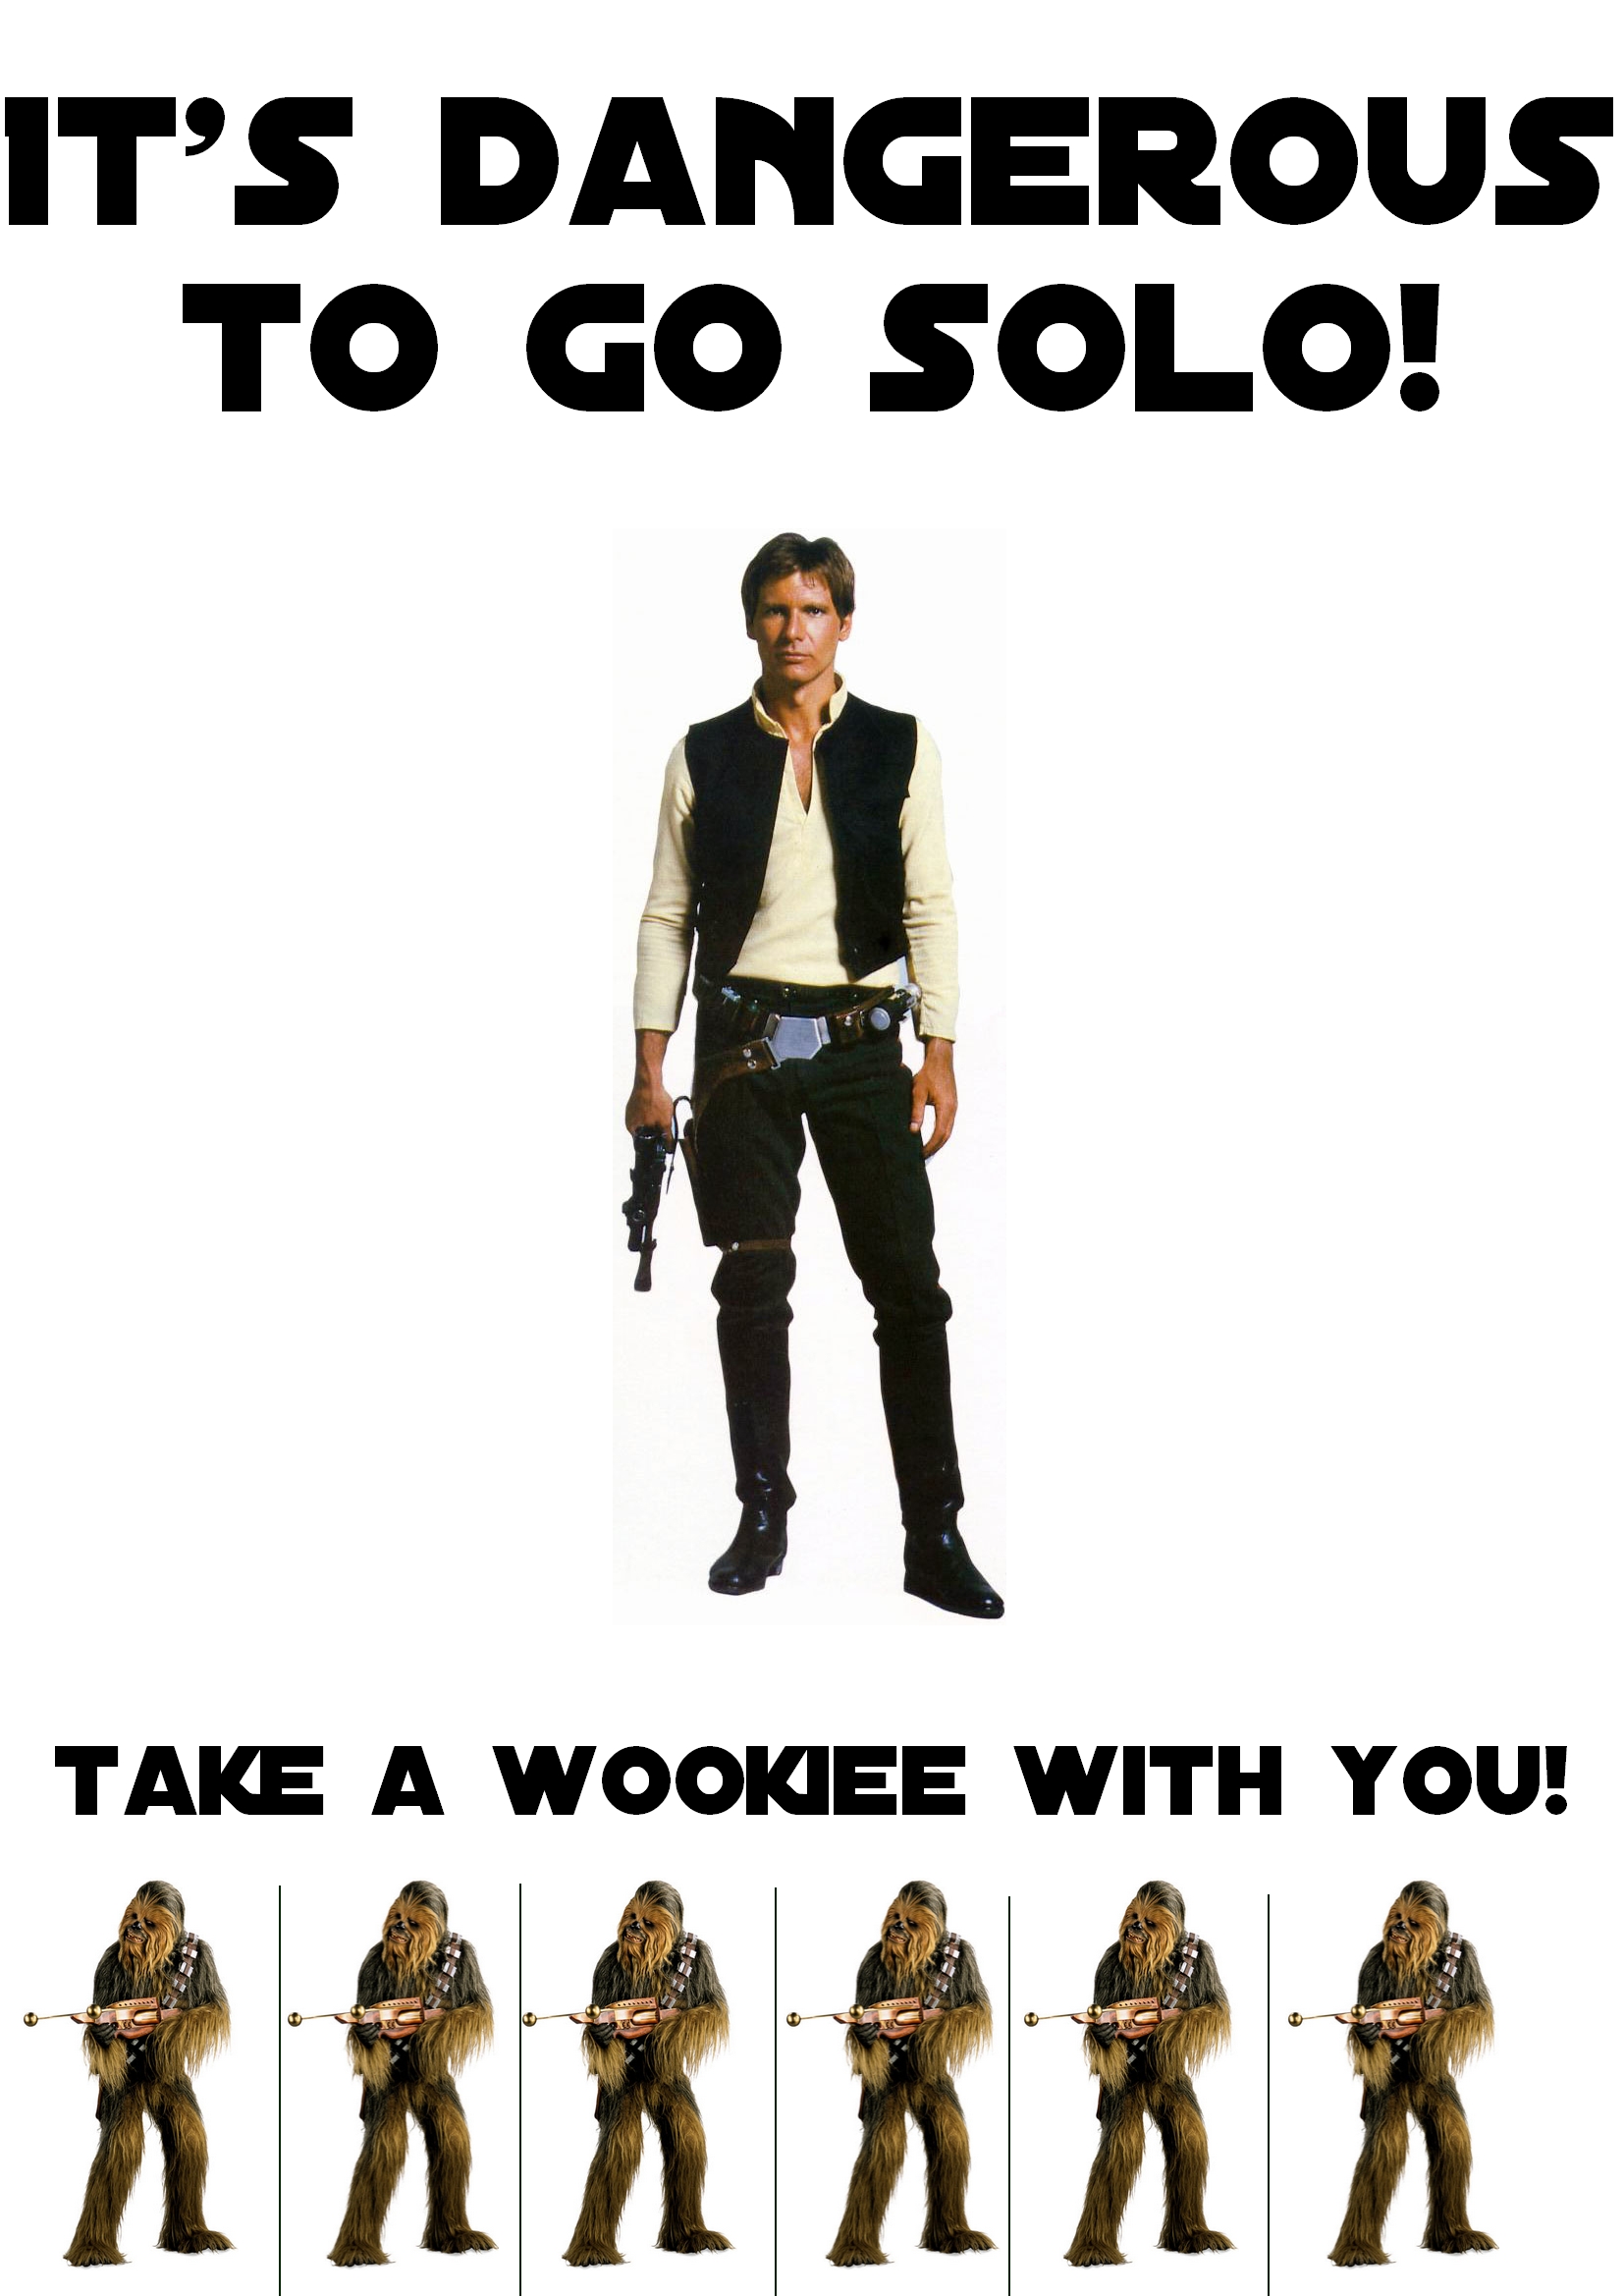 it__s_dangerous_to_go_solo__by_reloc3-d4rw2rc.jpg